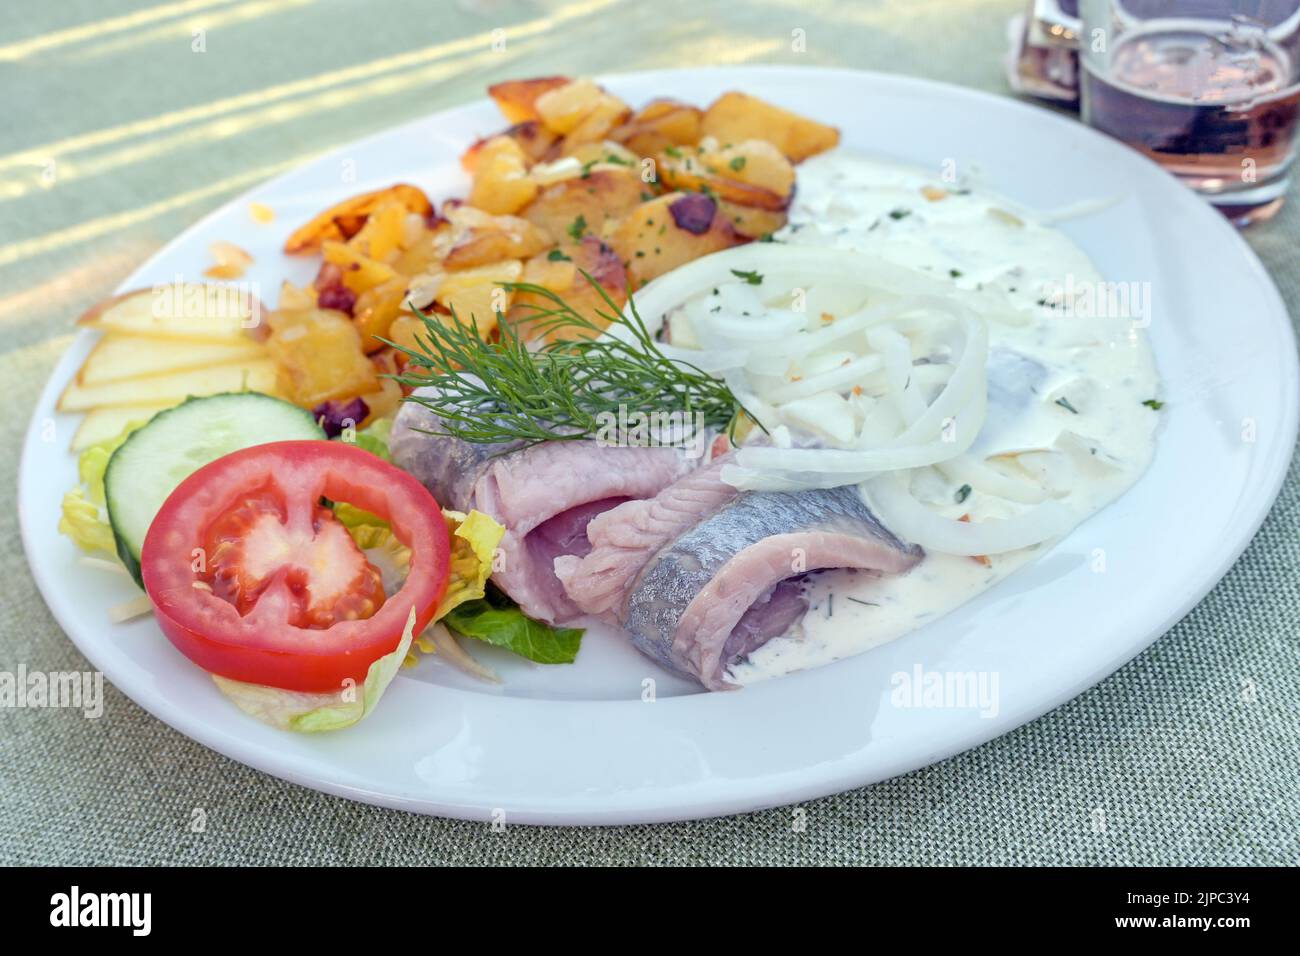 Pickled herring or matjes fillet with cream sauce and onions, served with fried potatoes and salad on a white plate, copy space, selected focus, narro Stock Photo